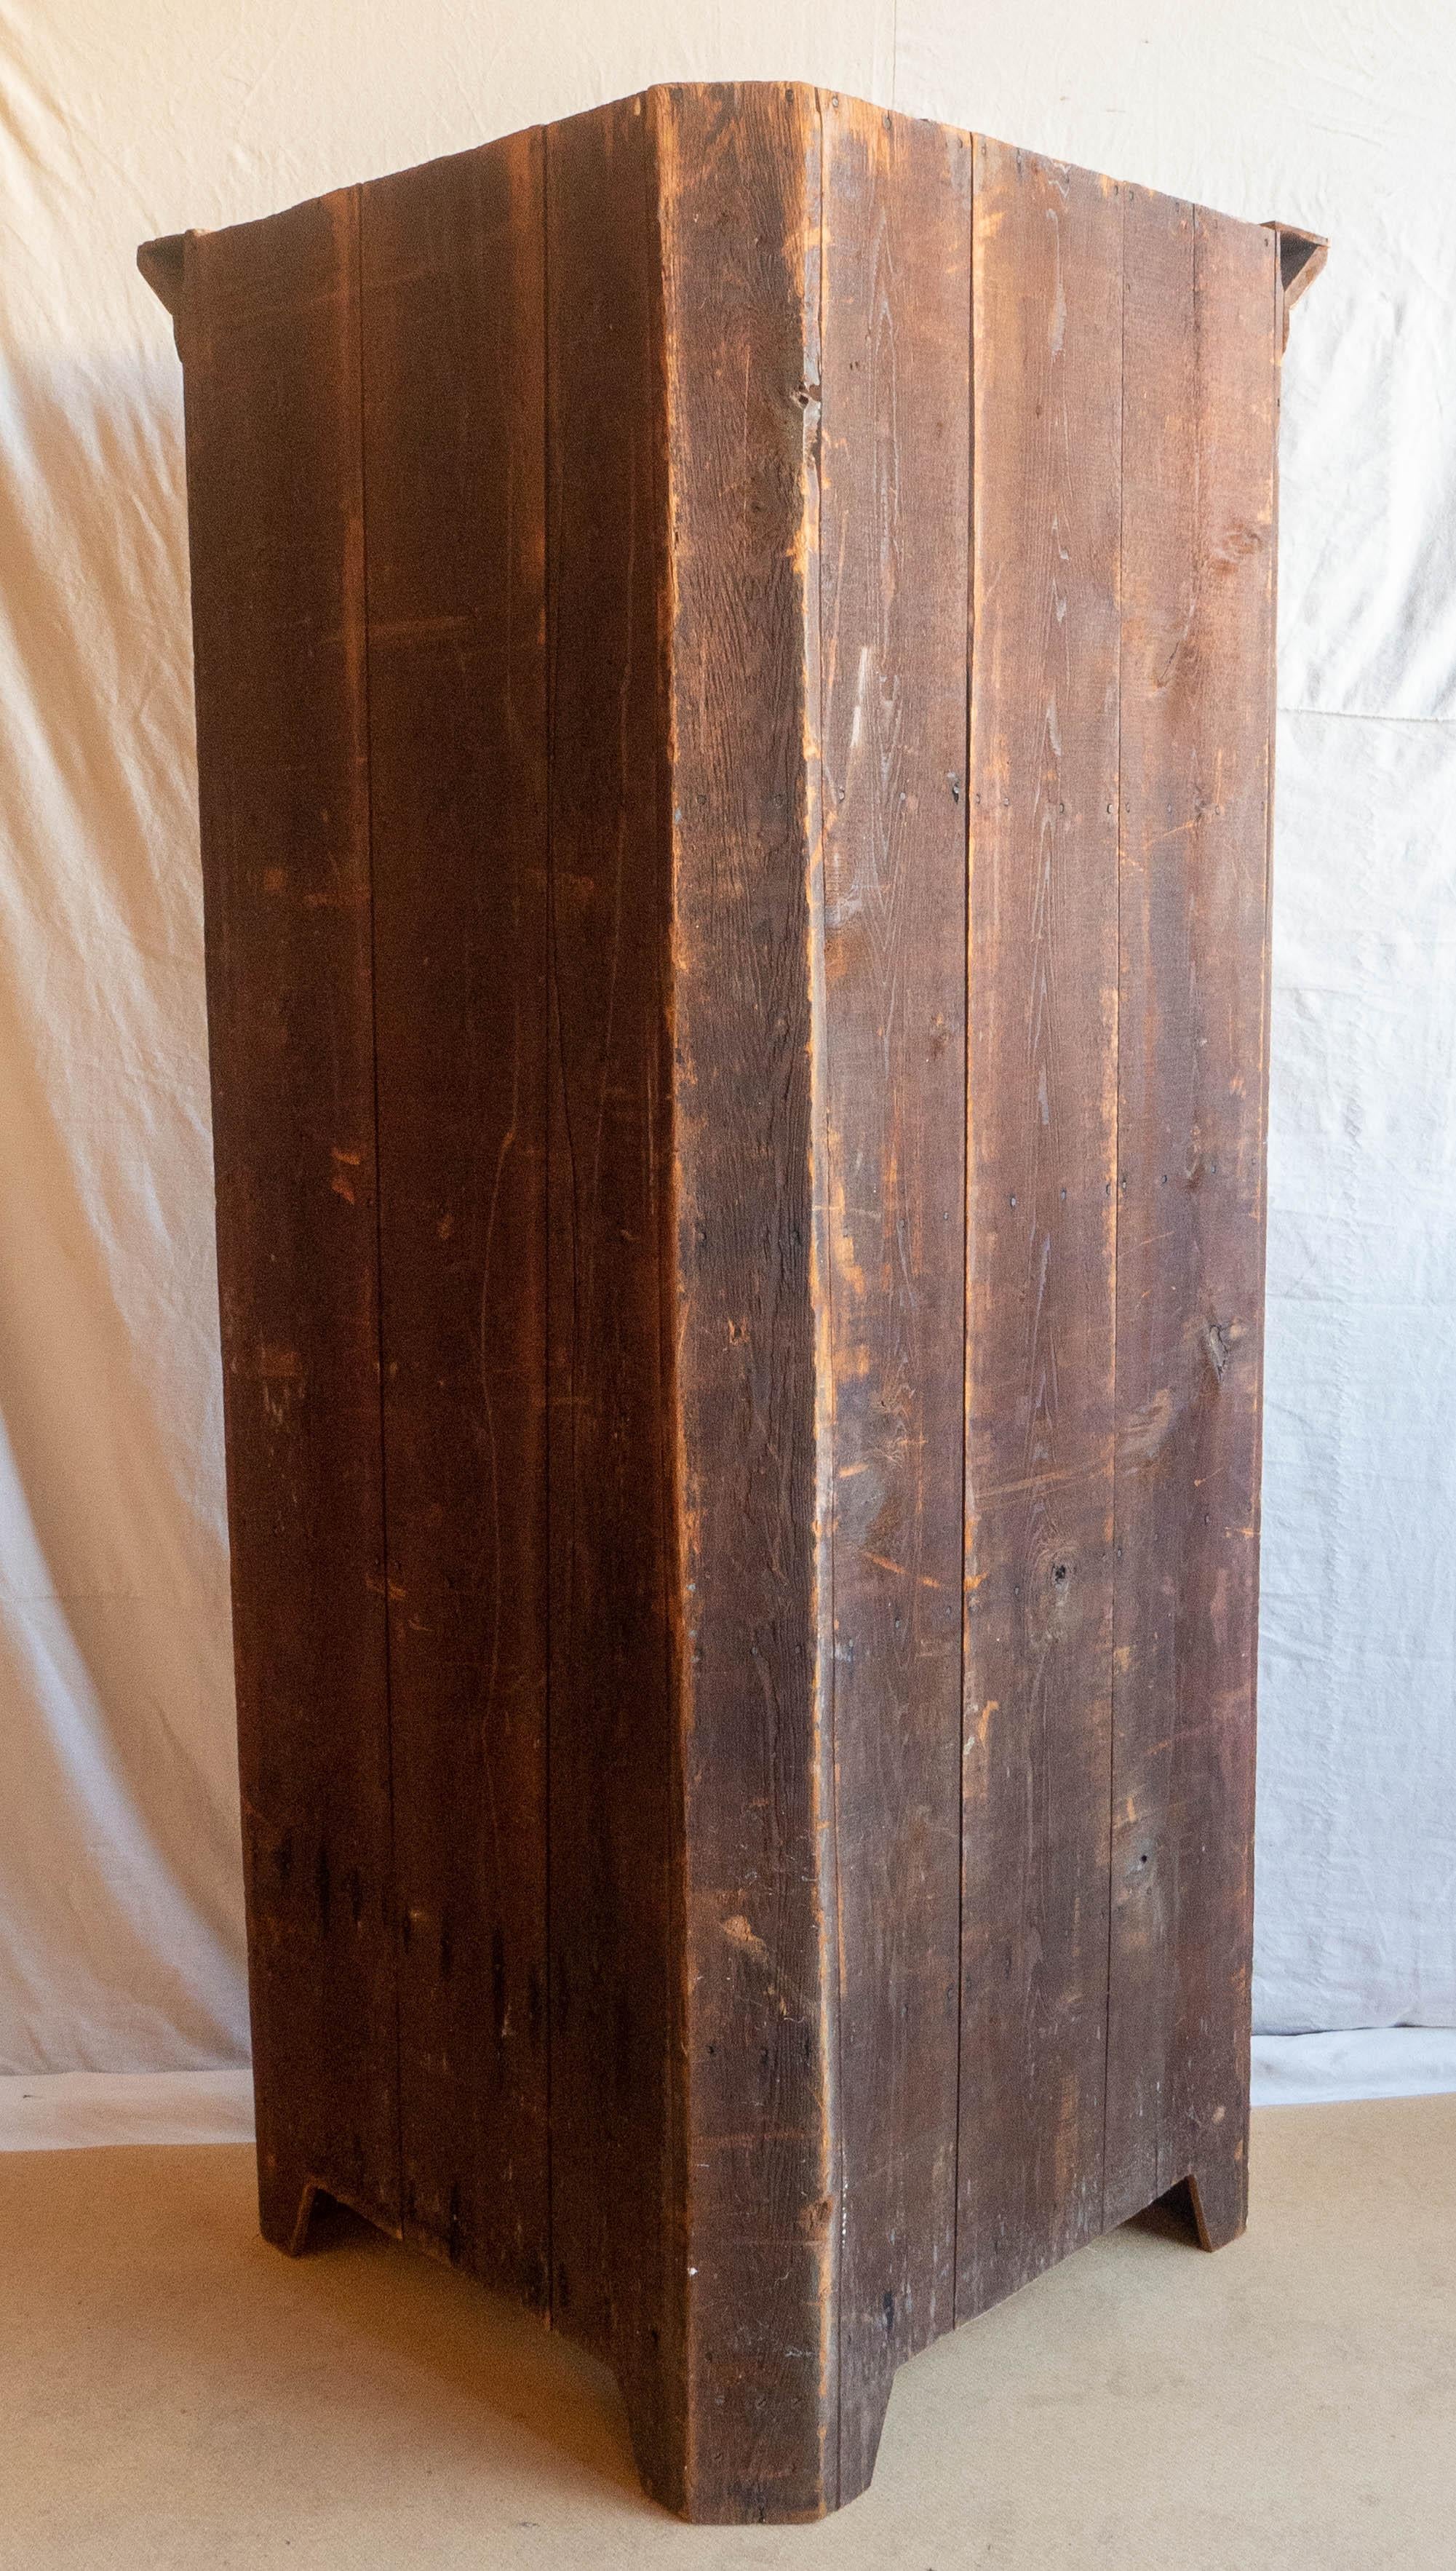 Hand-Crafted Late 18th Century New England Cherry Corner Cupboard